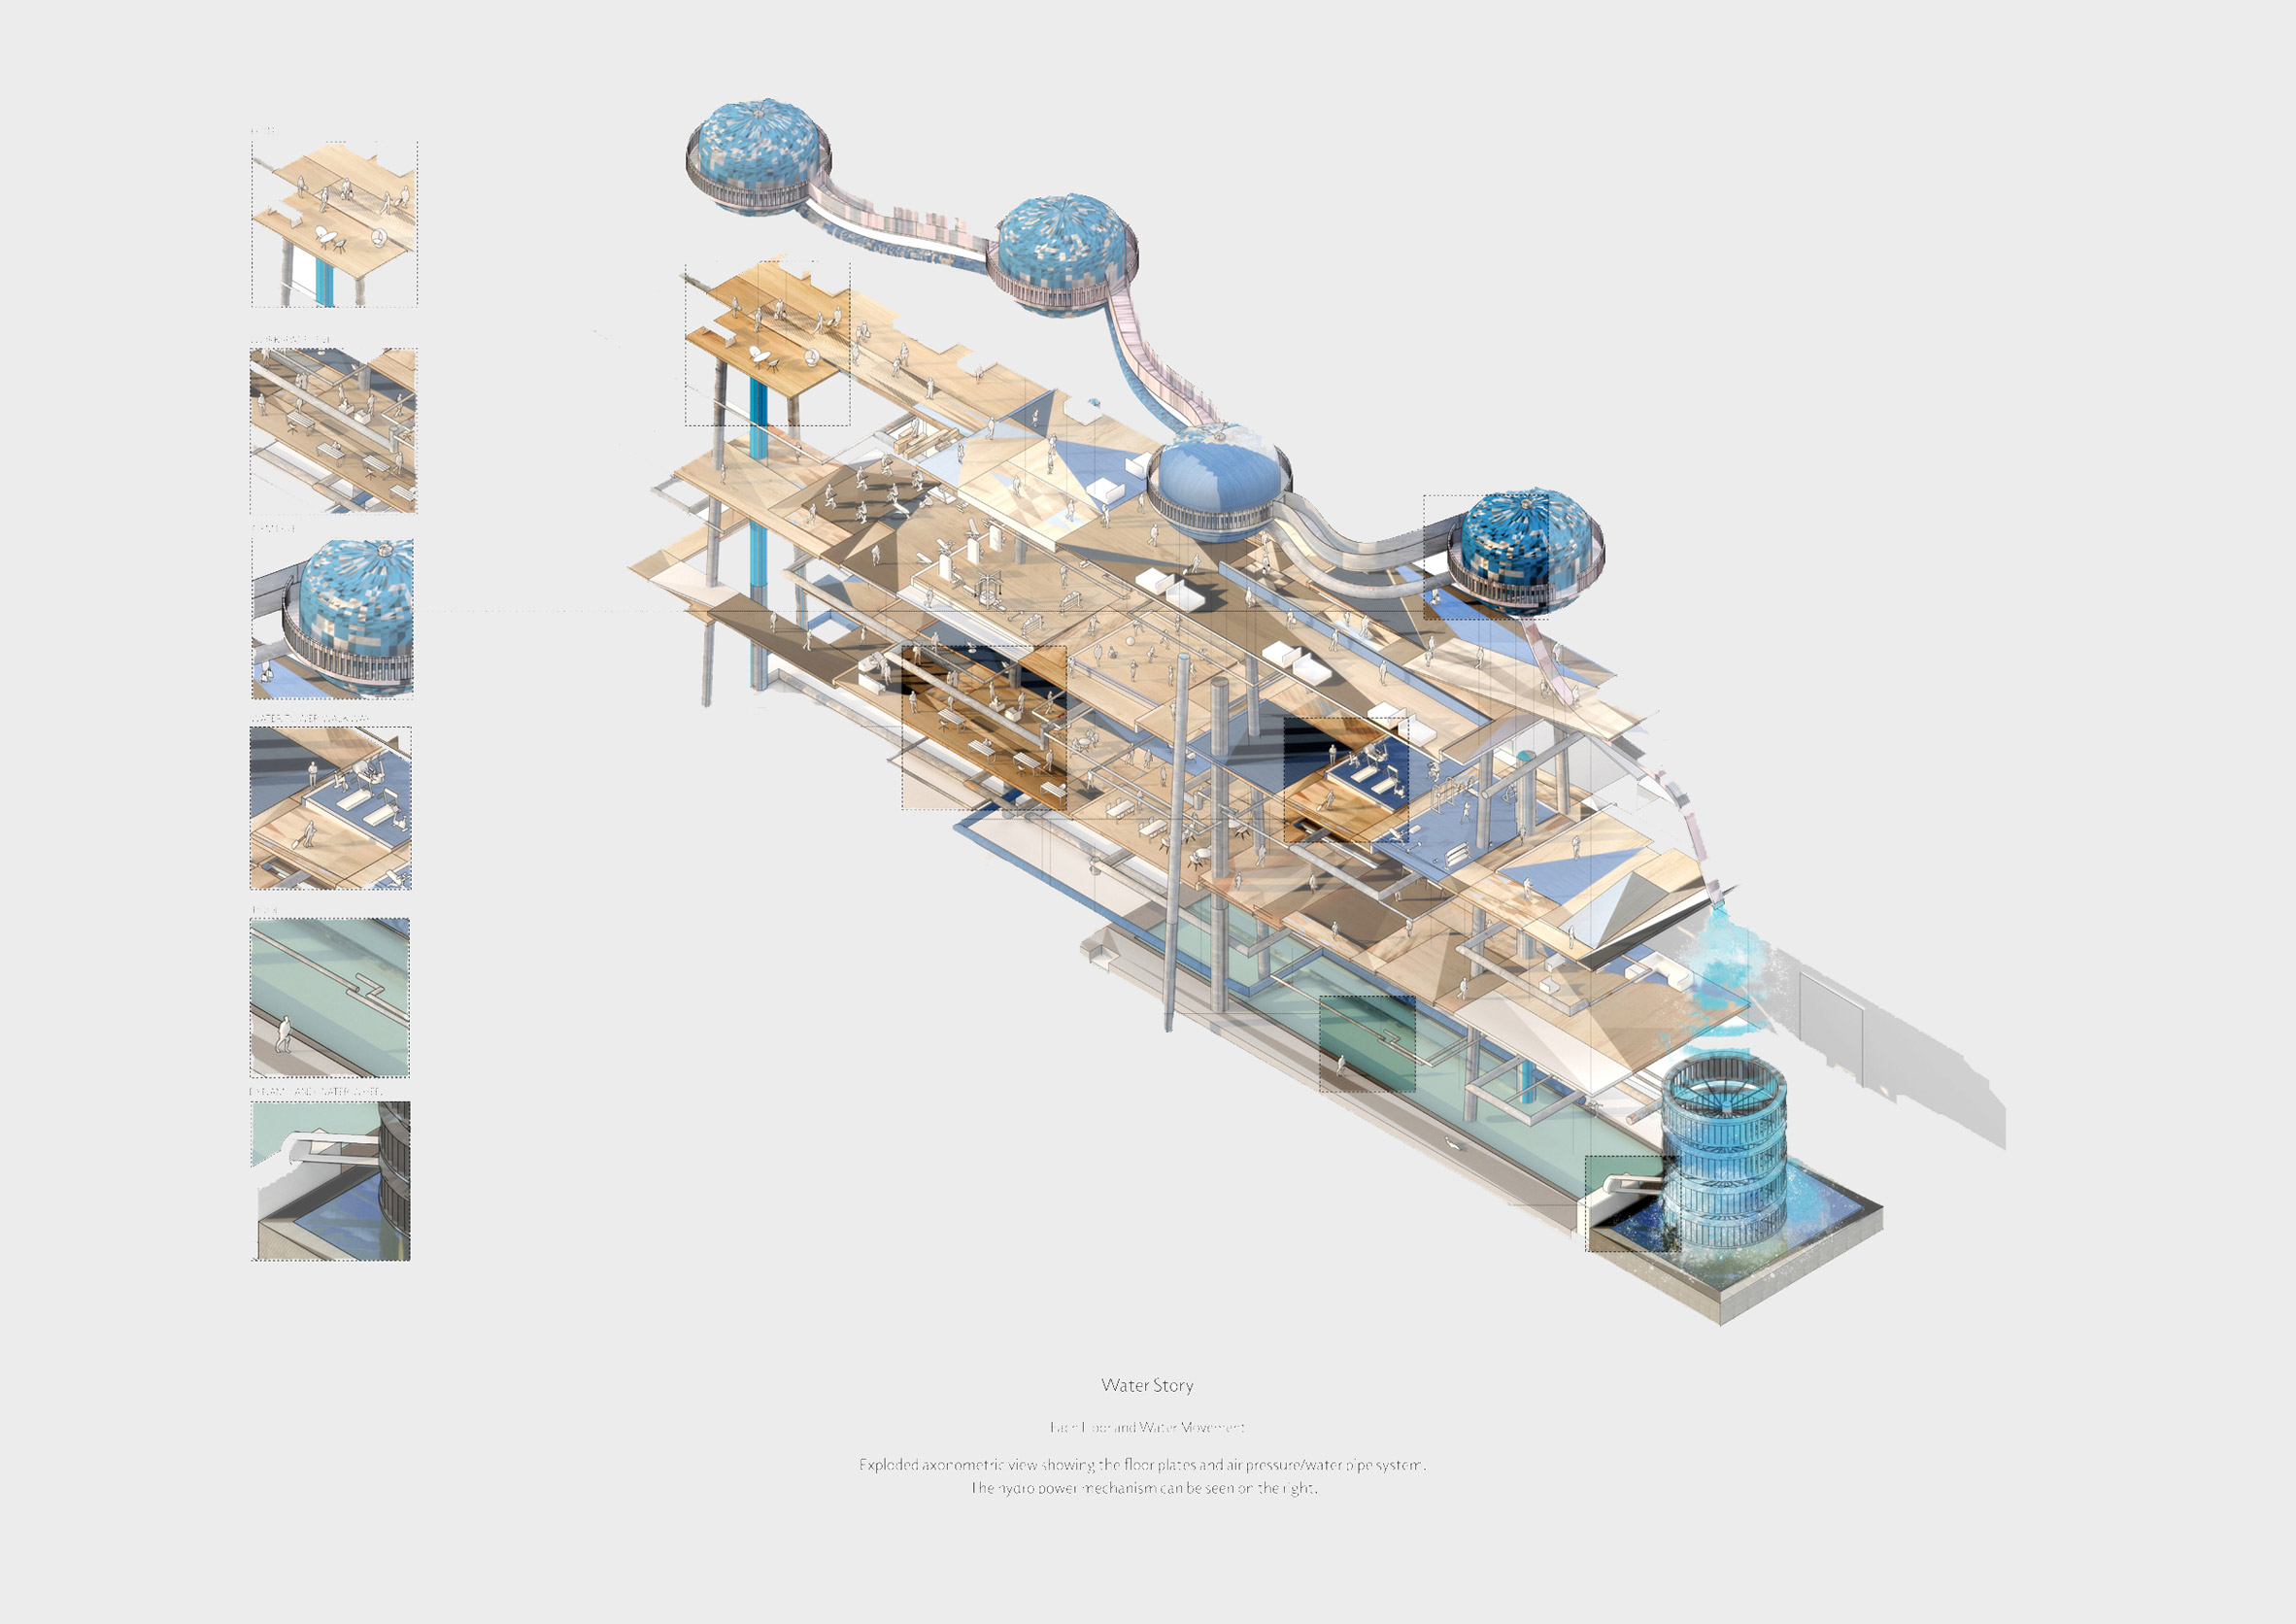 Illustrated architectural drawing of a hydropower system with close up detail drawings